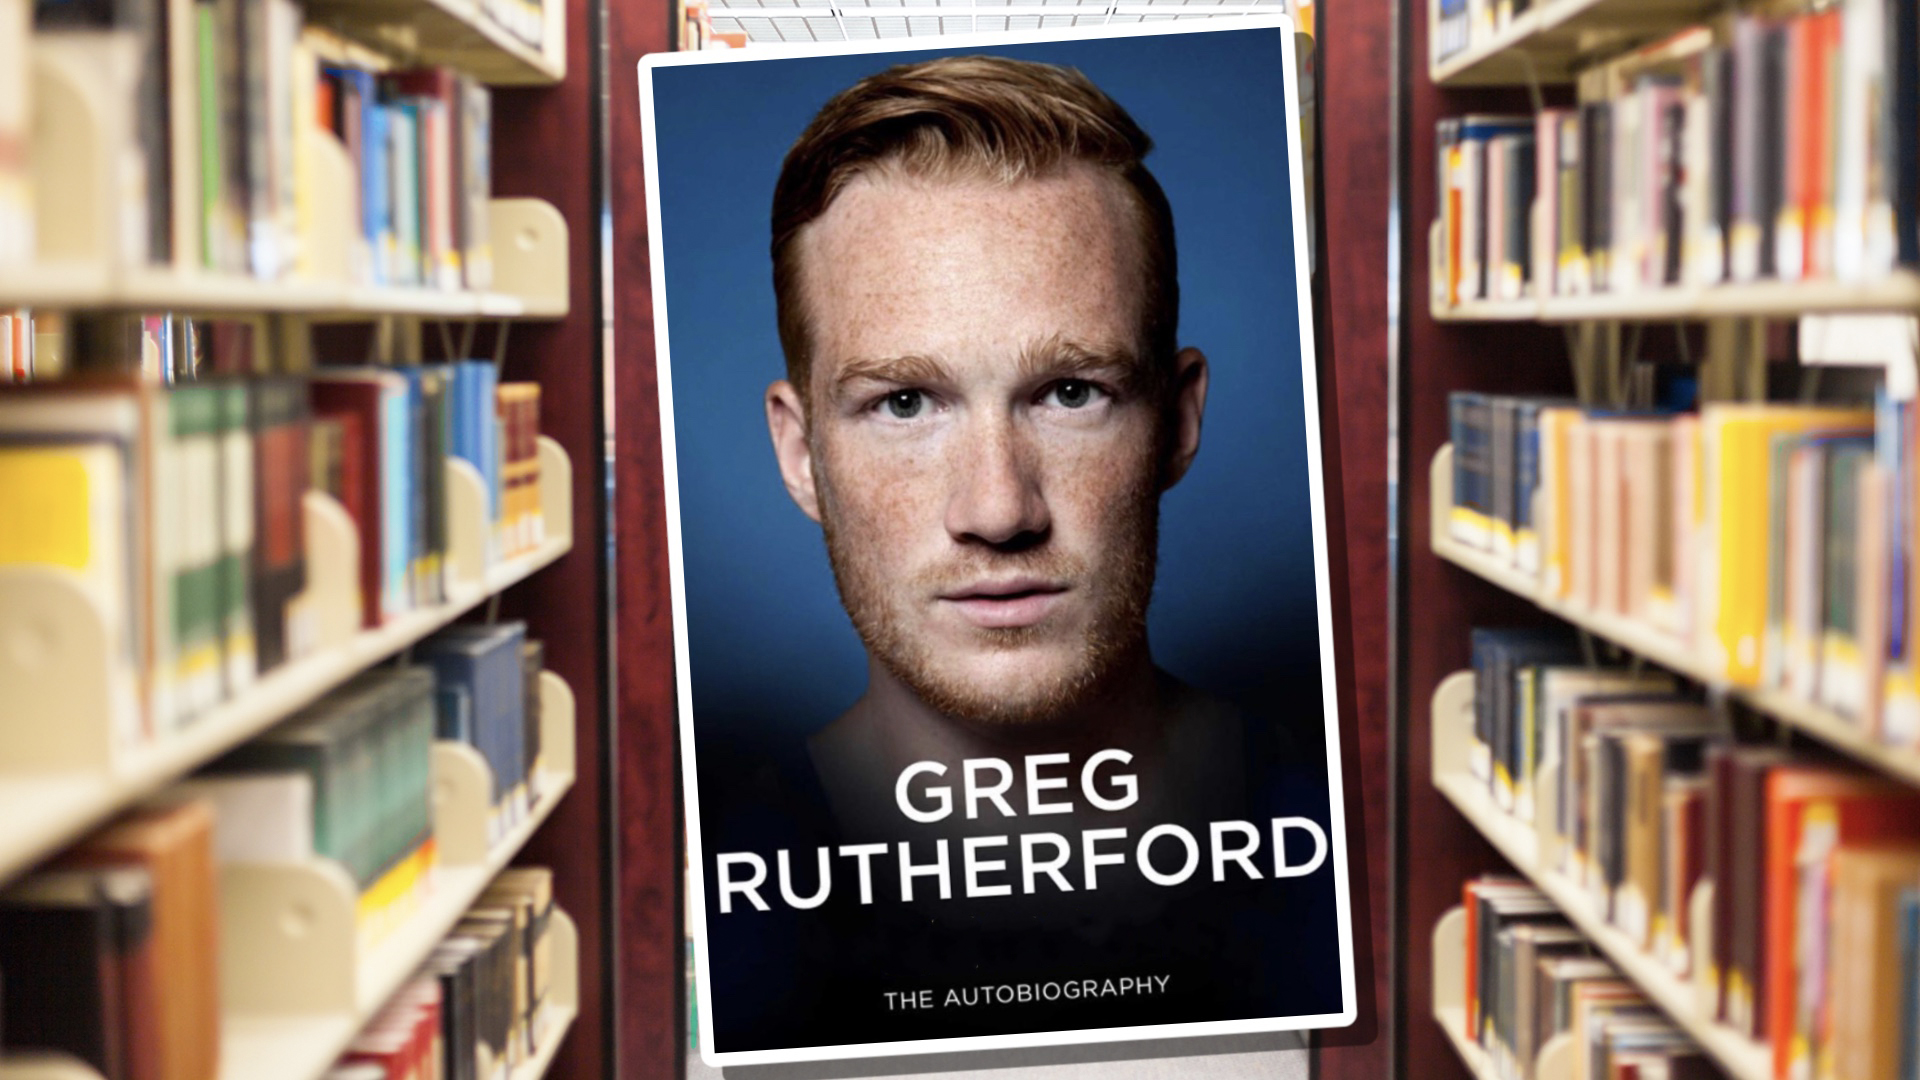 Greg Rutherford’s autobiography 